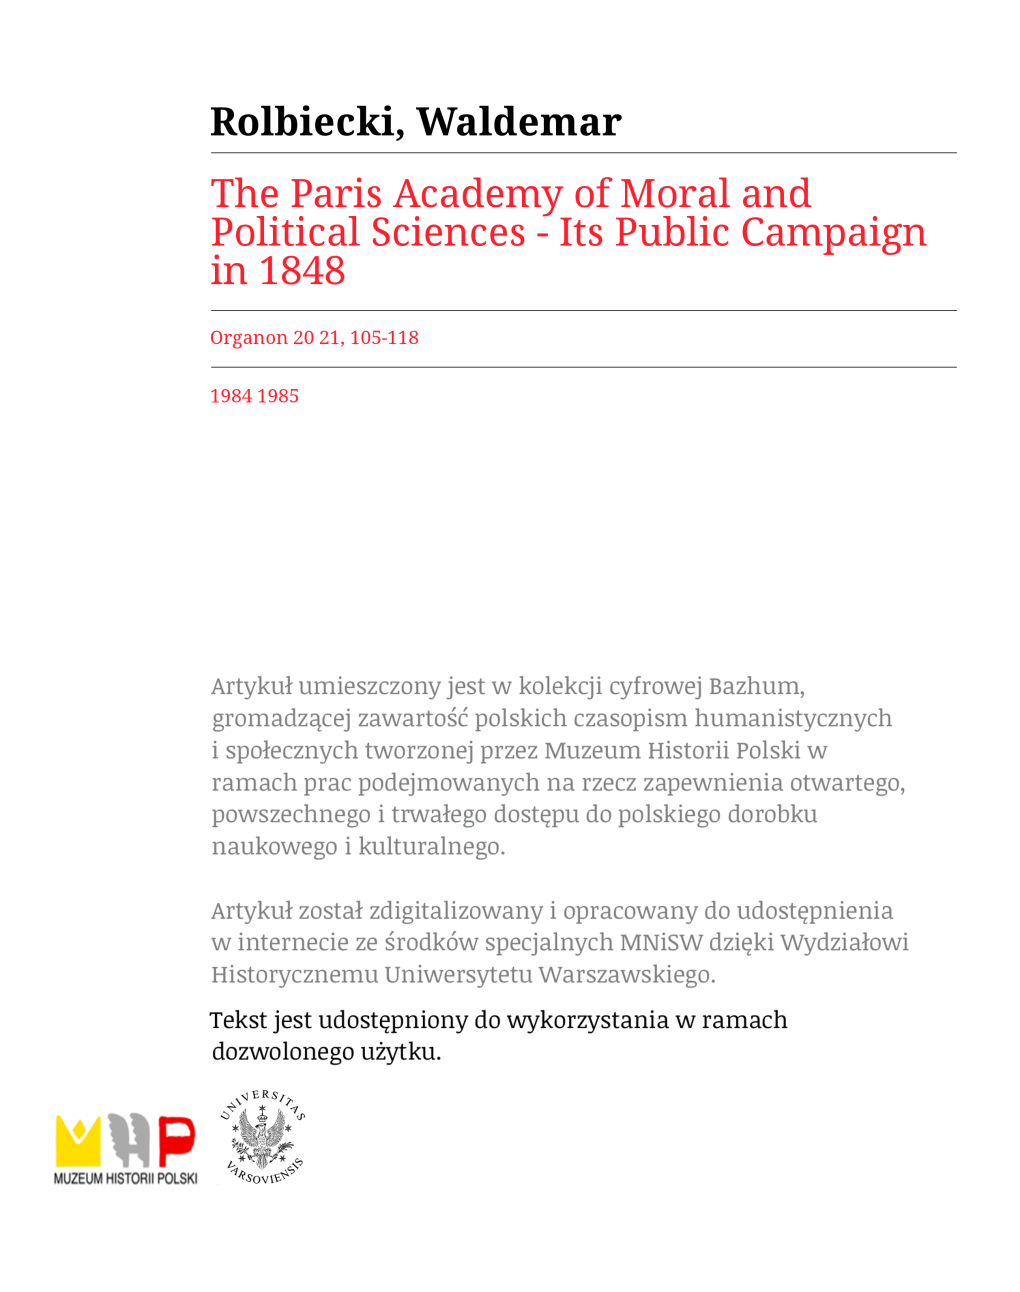 The Paris Academy of Moral and Political Sciences-Its